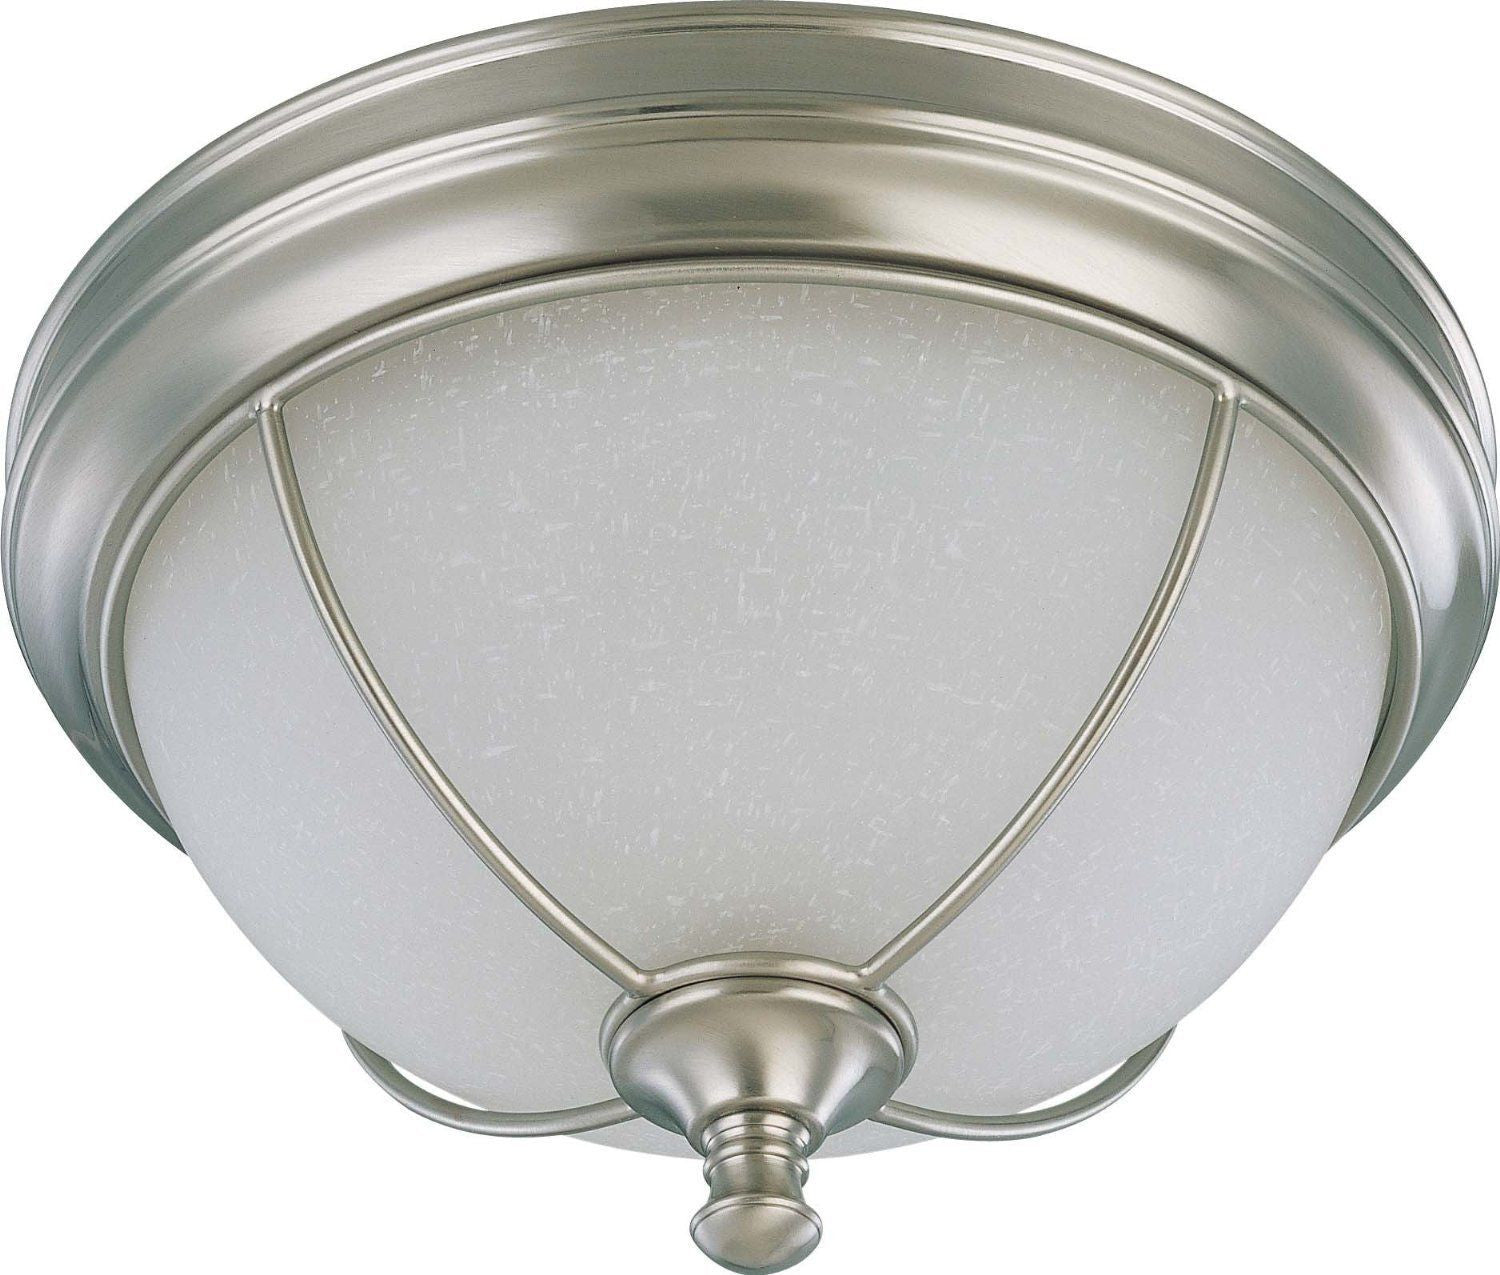 Nuvo Lighting 60-2823 Salem Collection Two Light Flush Ceiling Mount in Brushed Nickel Finish